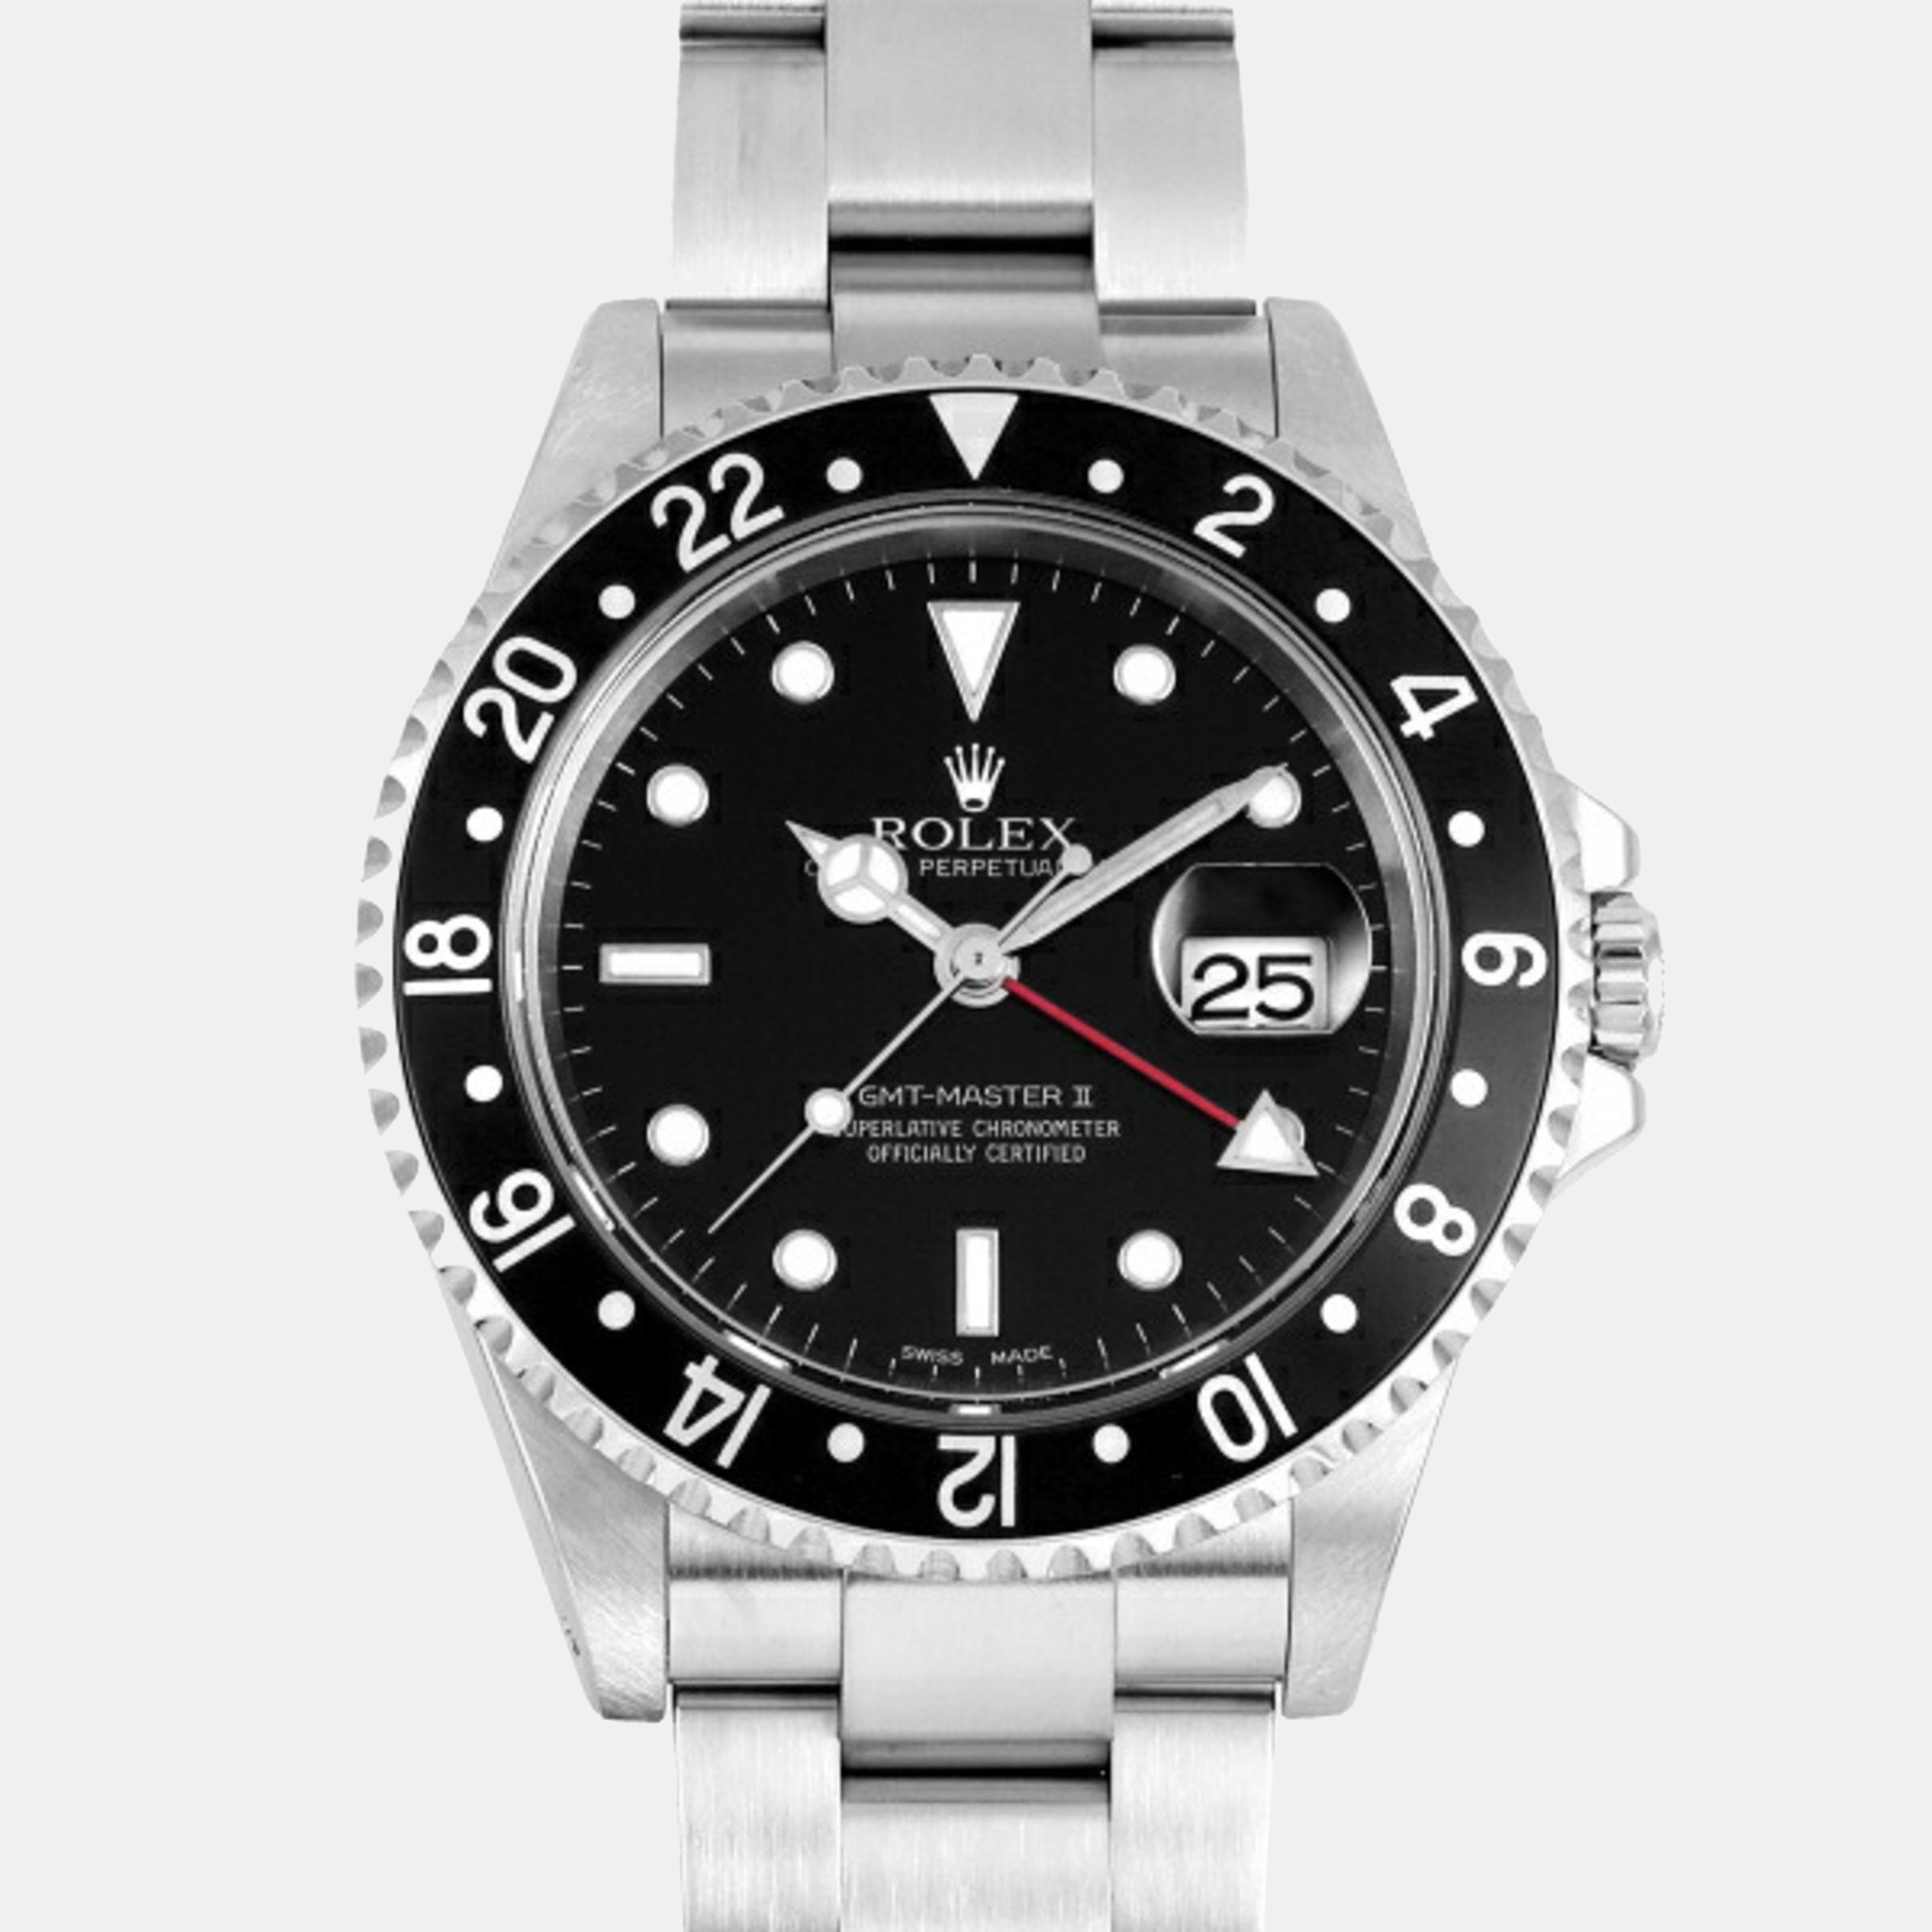 Rolex Black Stainless Steel And Ceramic GMT-Master II 16710 Automatic Men's Wristwatch 40 Mm